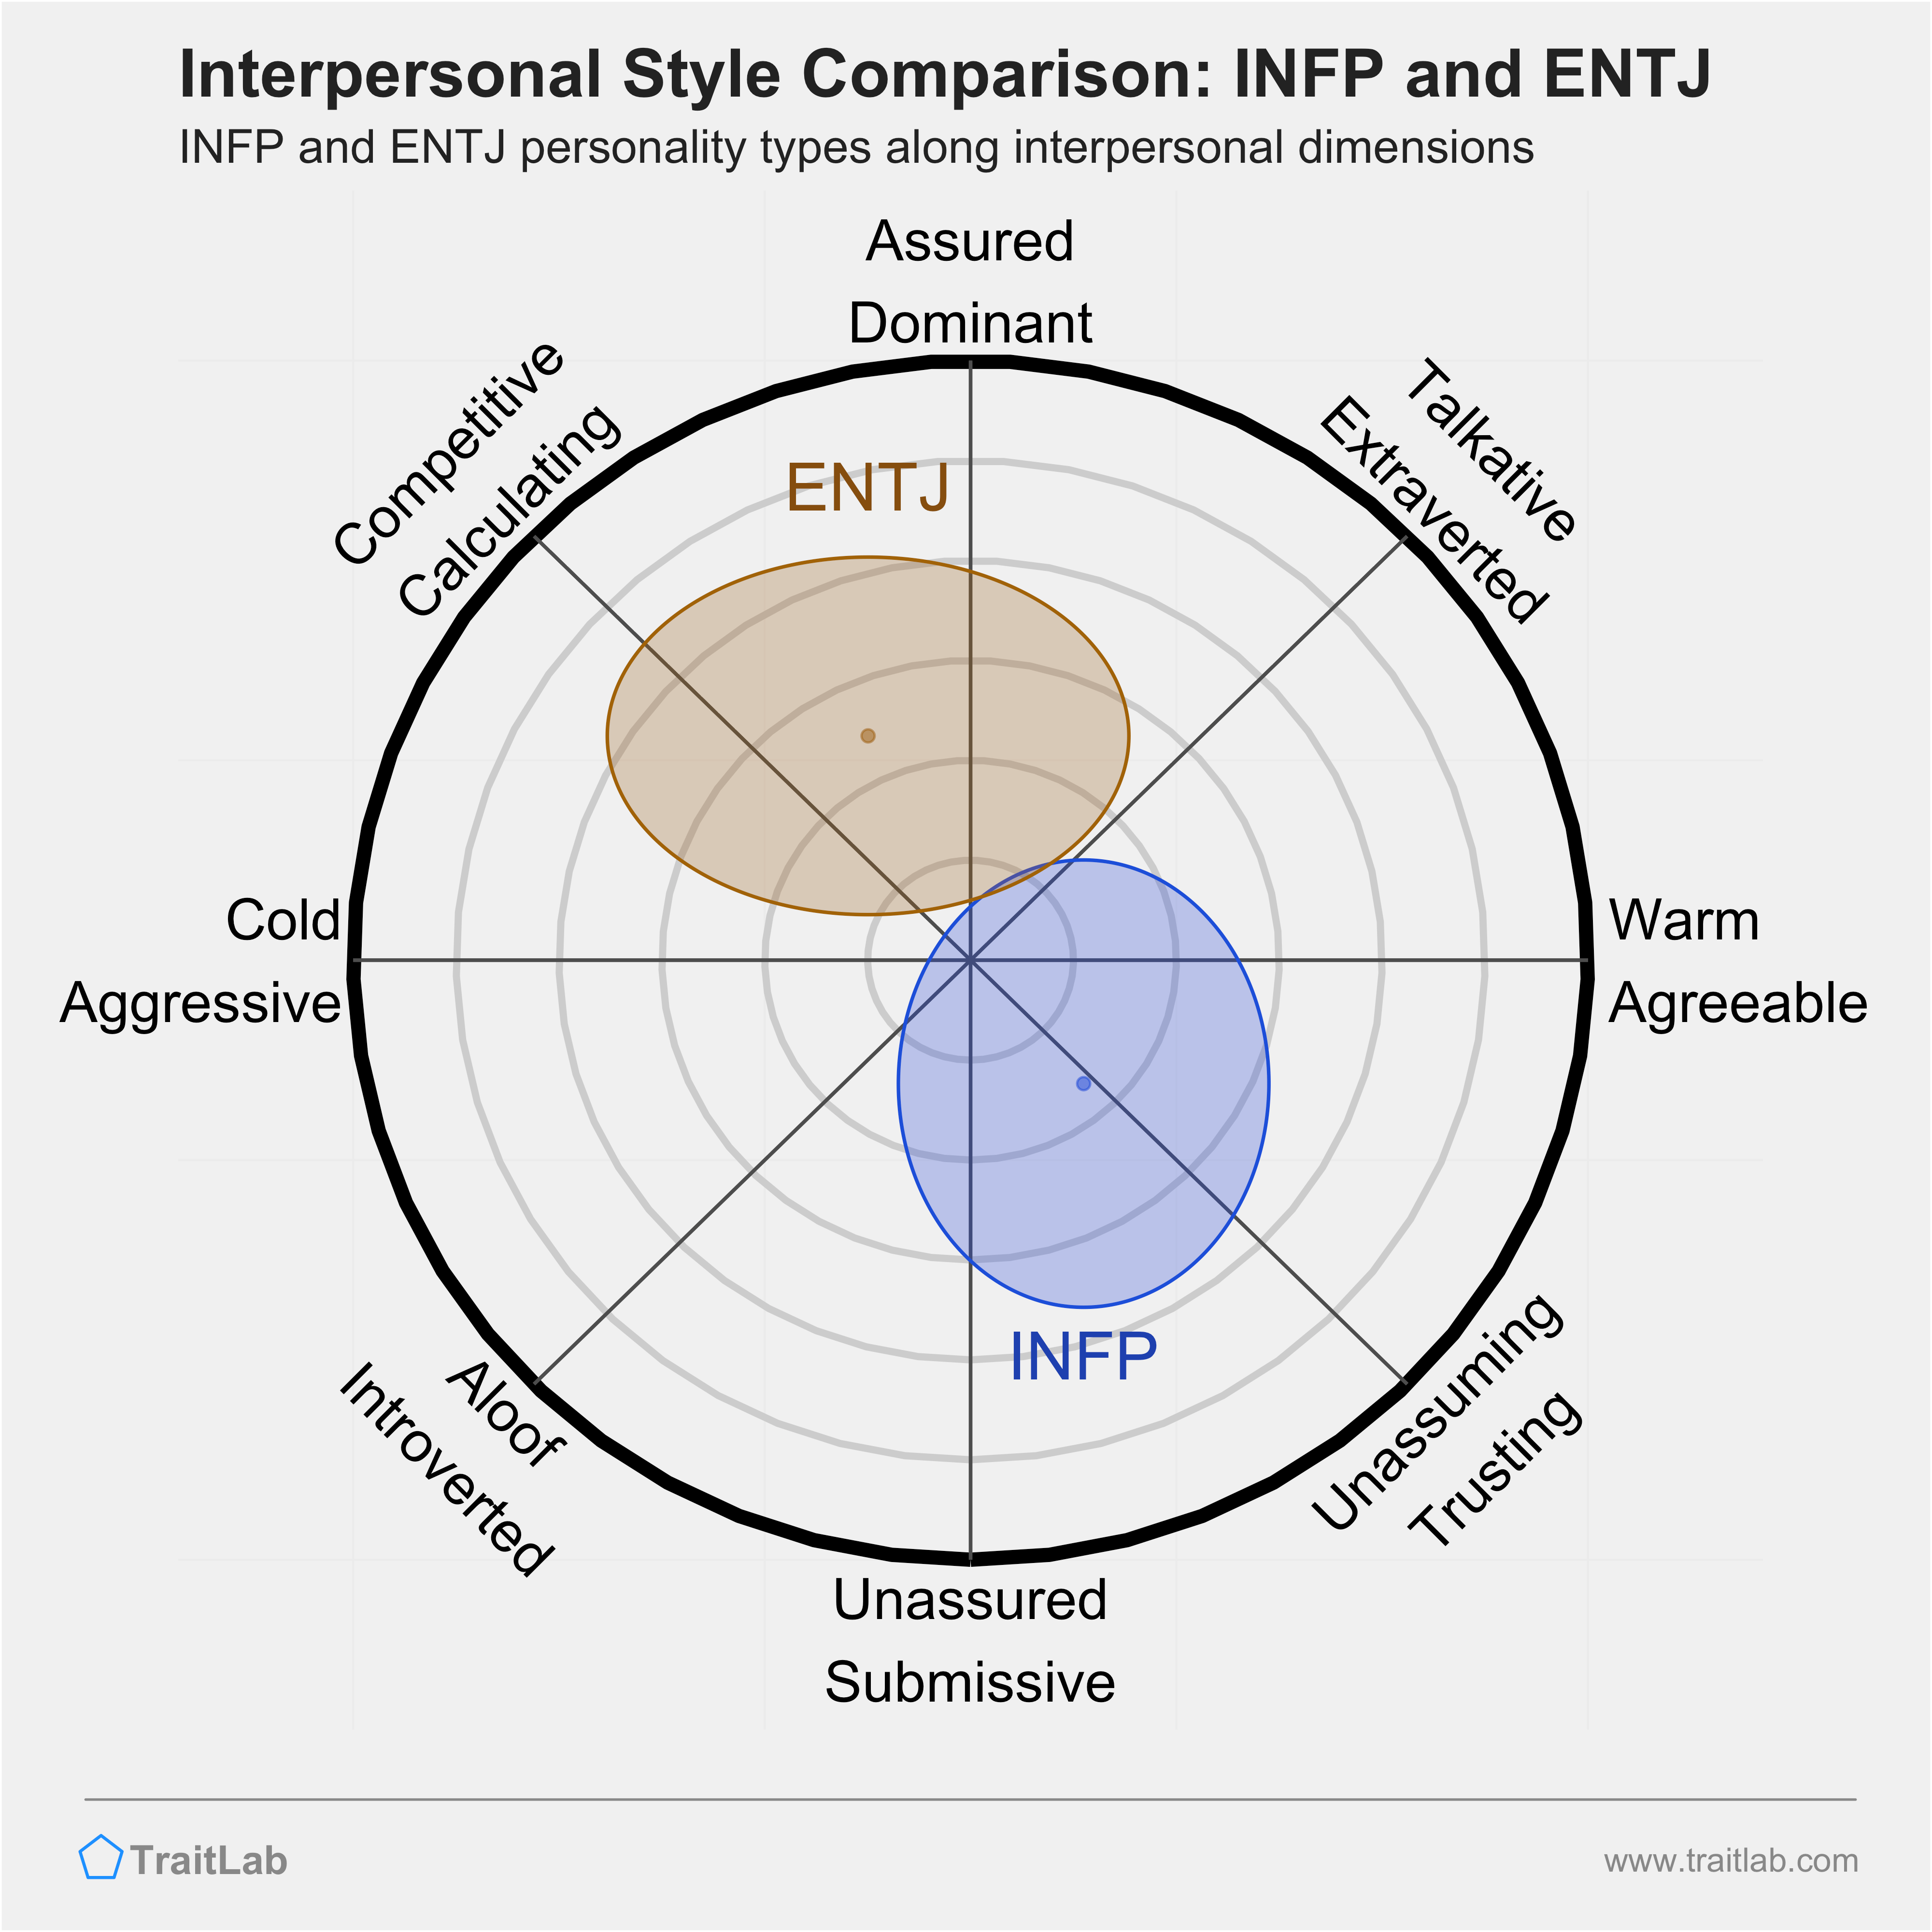 INFP and ENTJ comparison across interpersonal dimensions